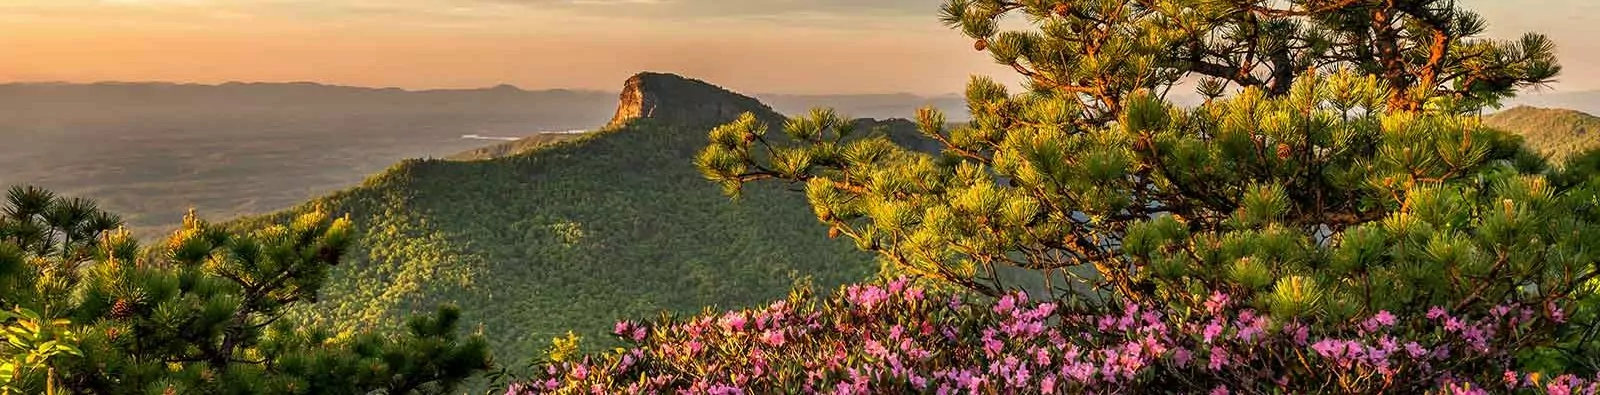 Wildflowers and sunset over Blue Ridge Mountains